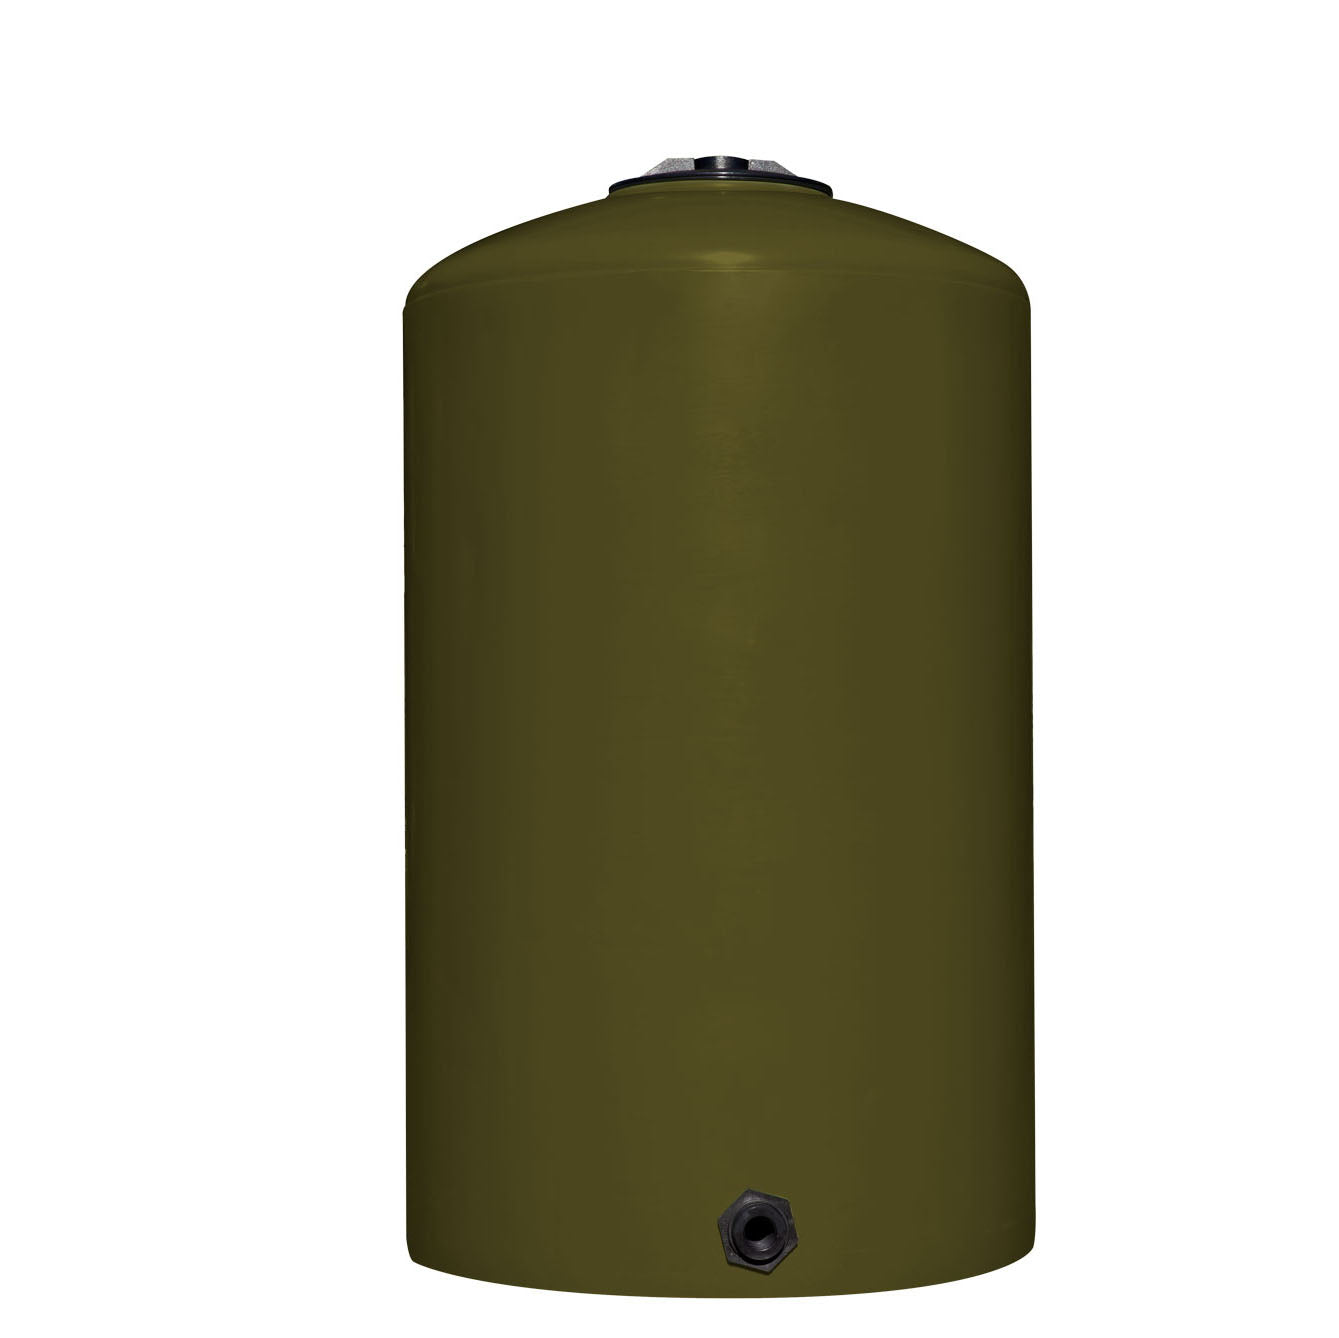 Bailey 425L bronze olive water tank